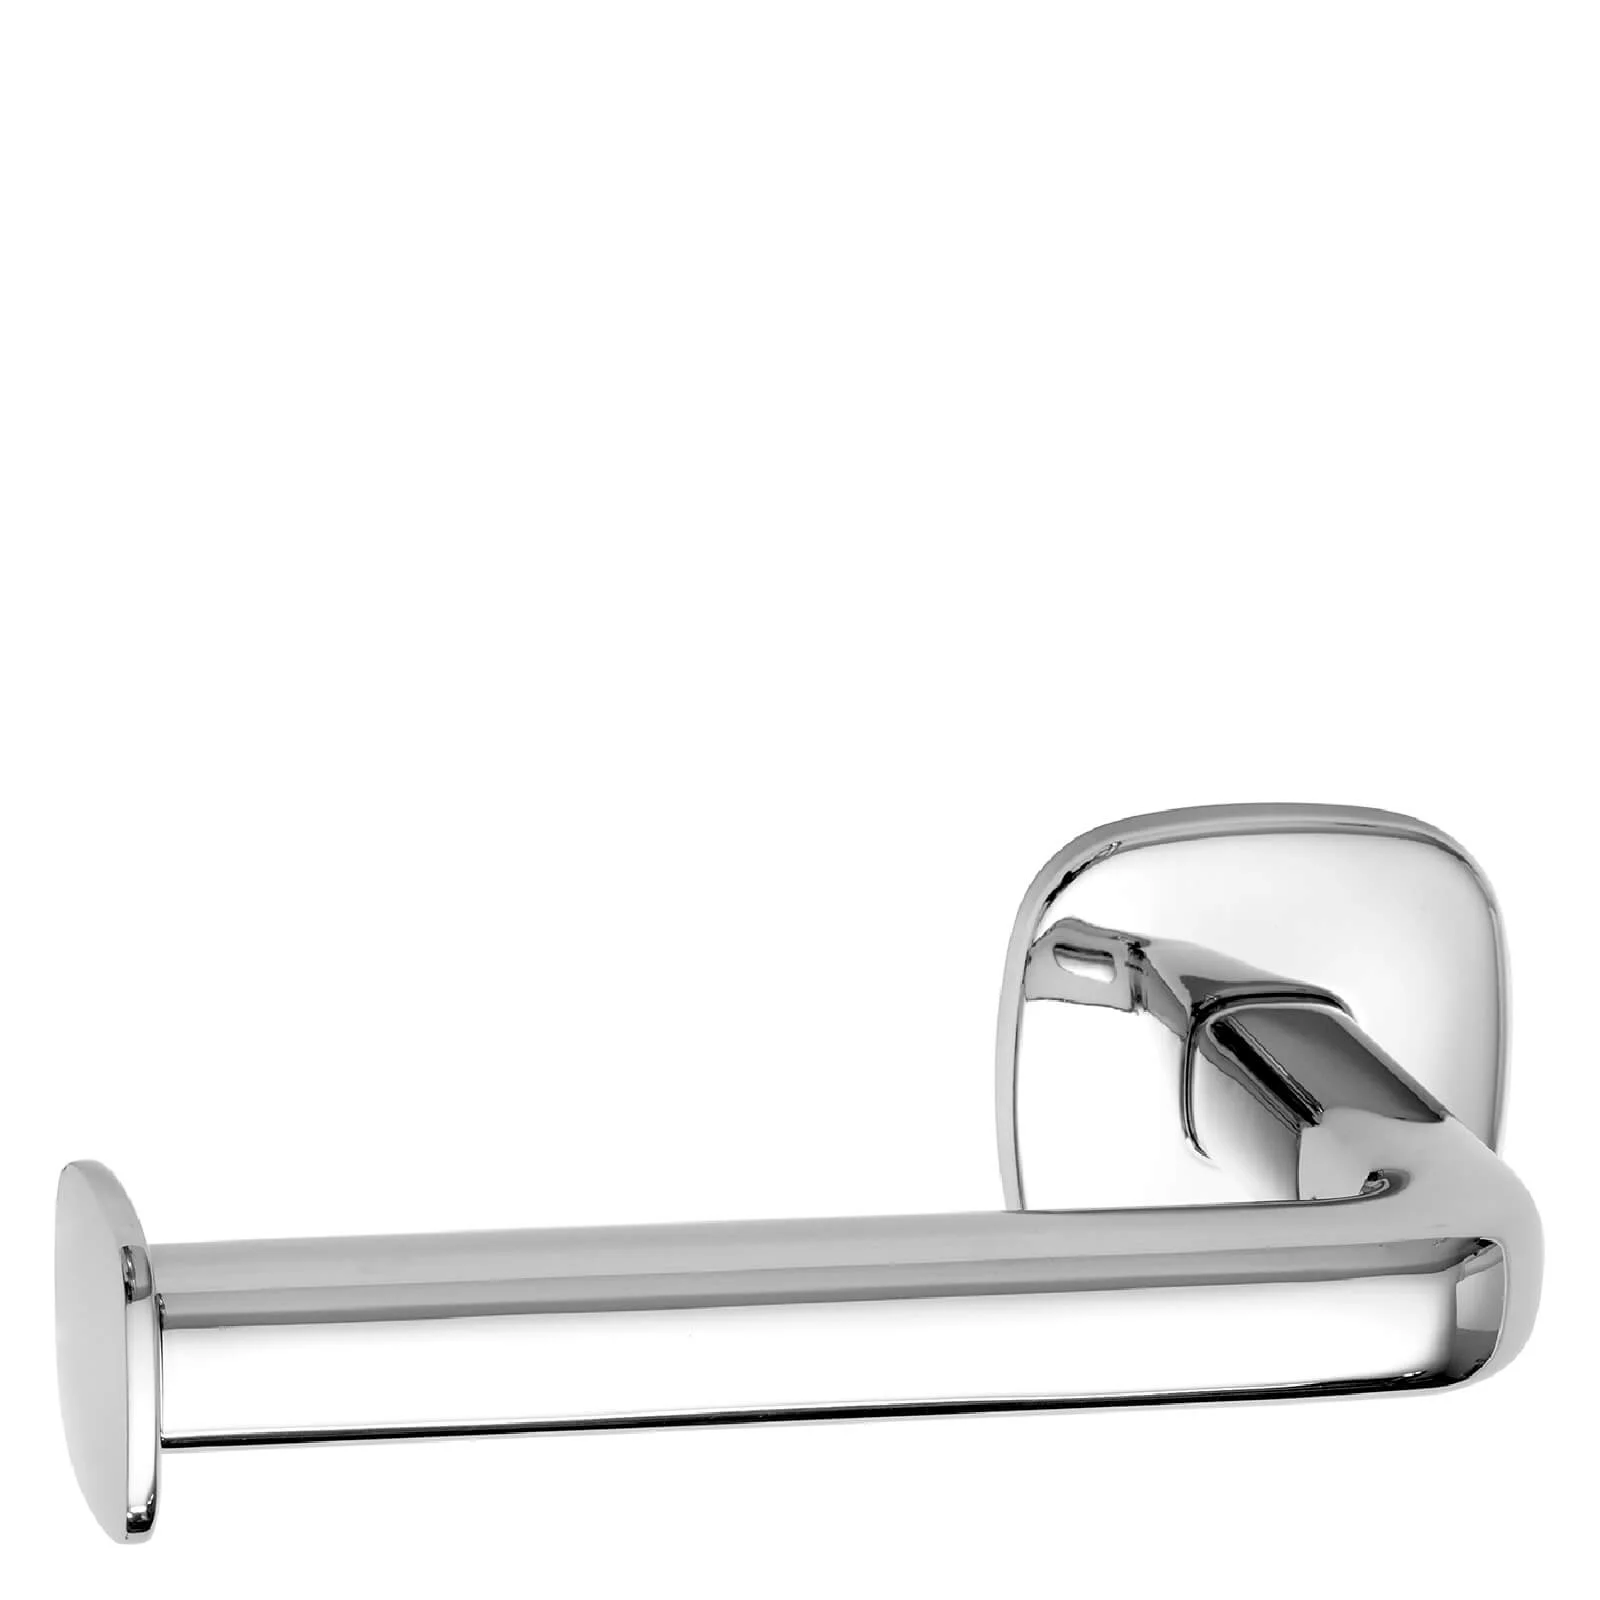 Robert Welch Burford Toilet Roll Holder Fixed Image 1